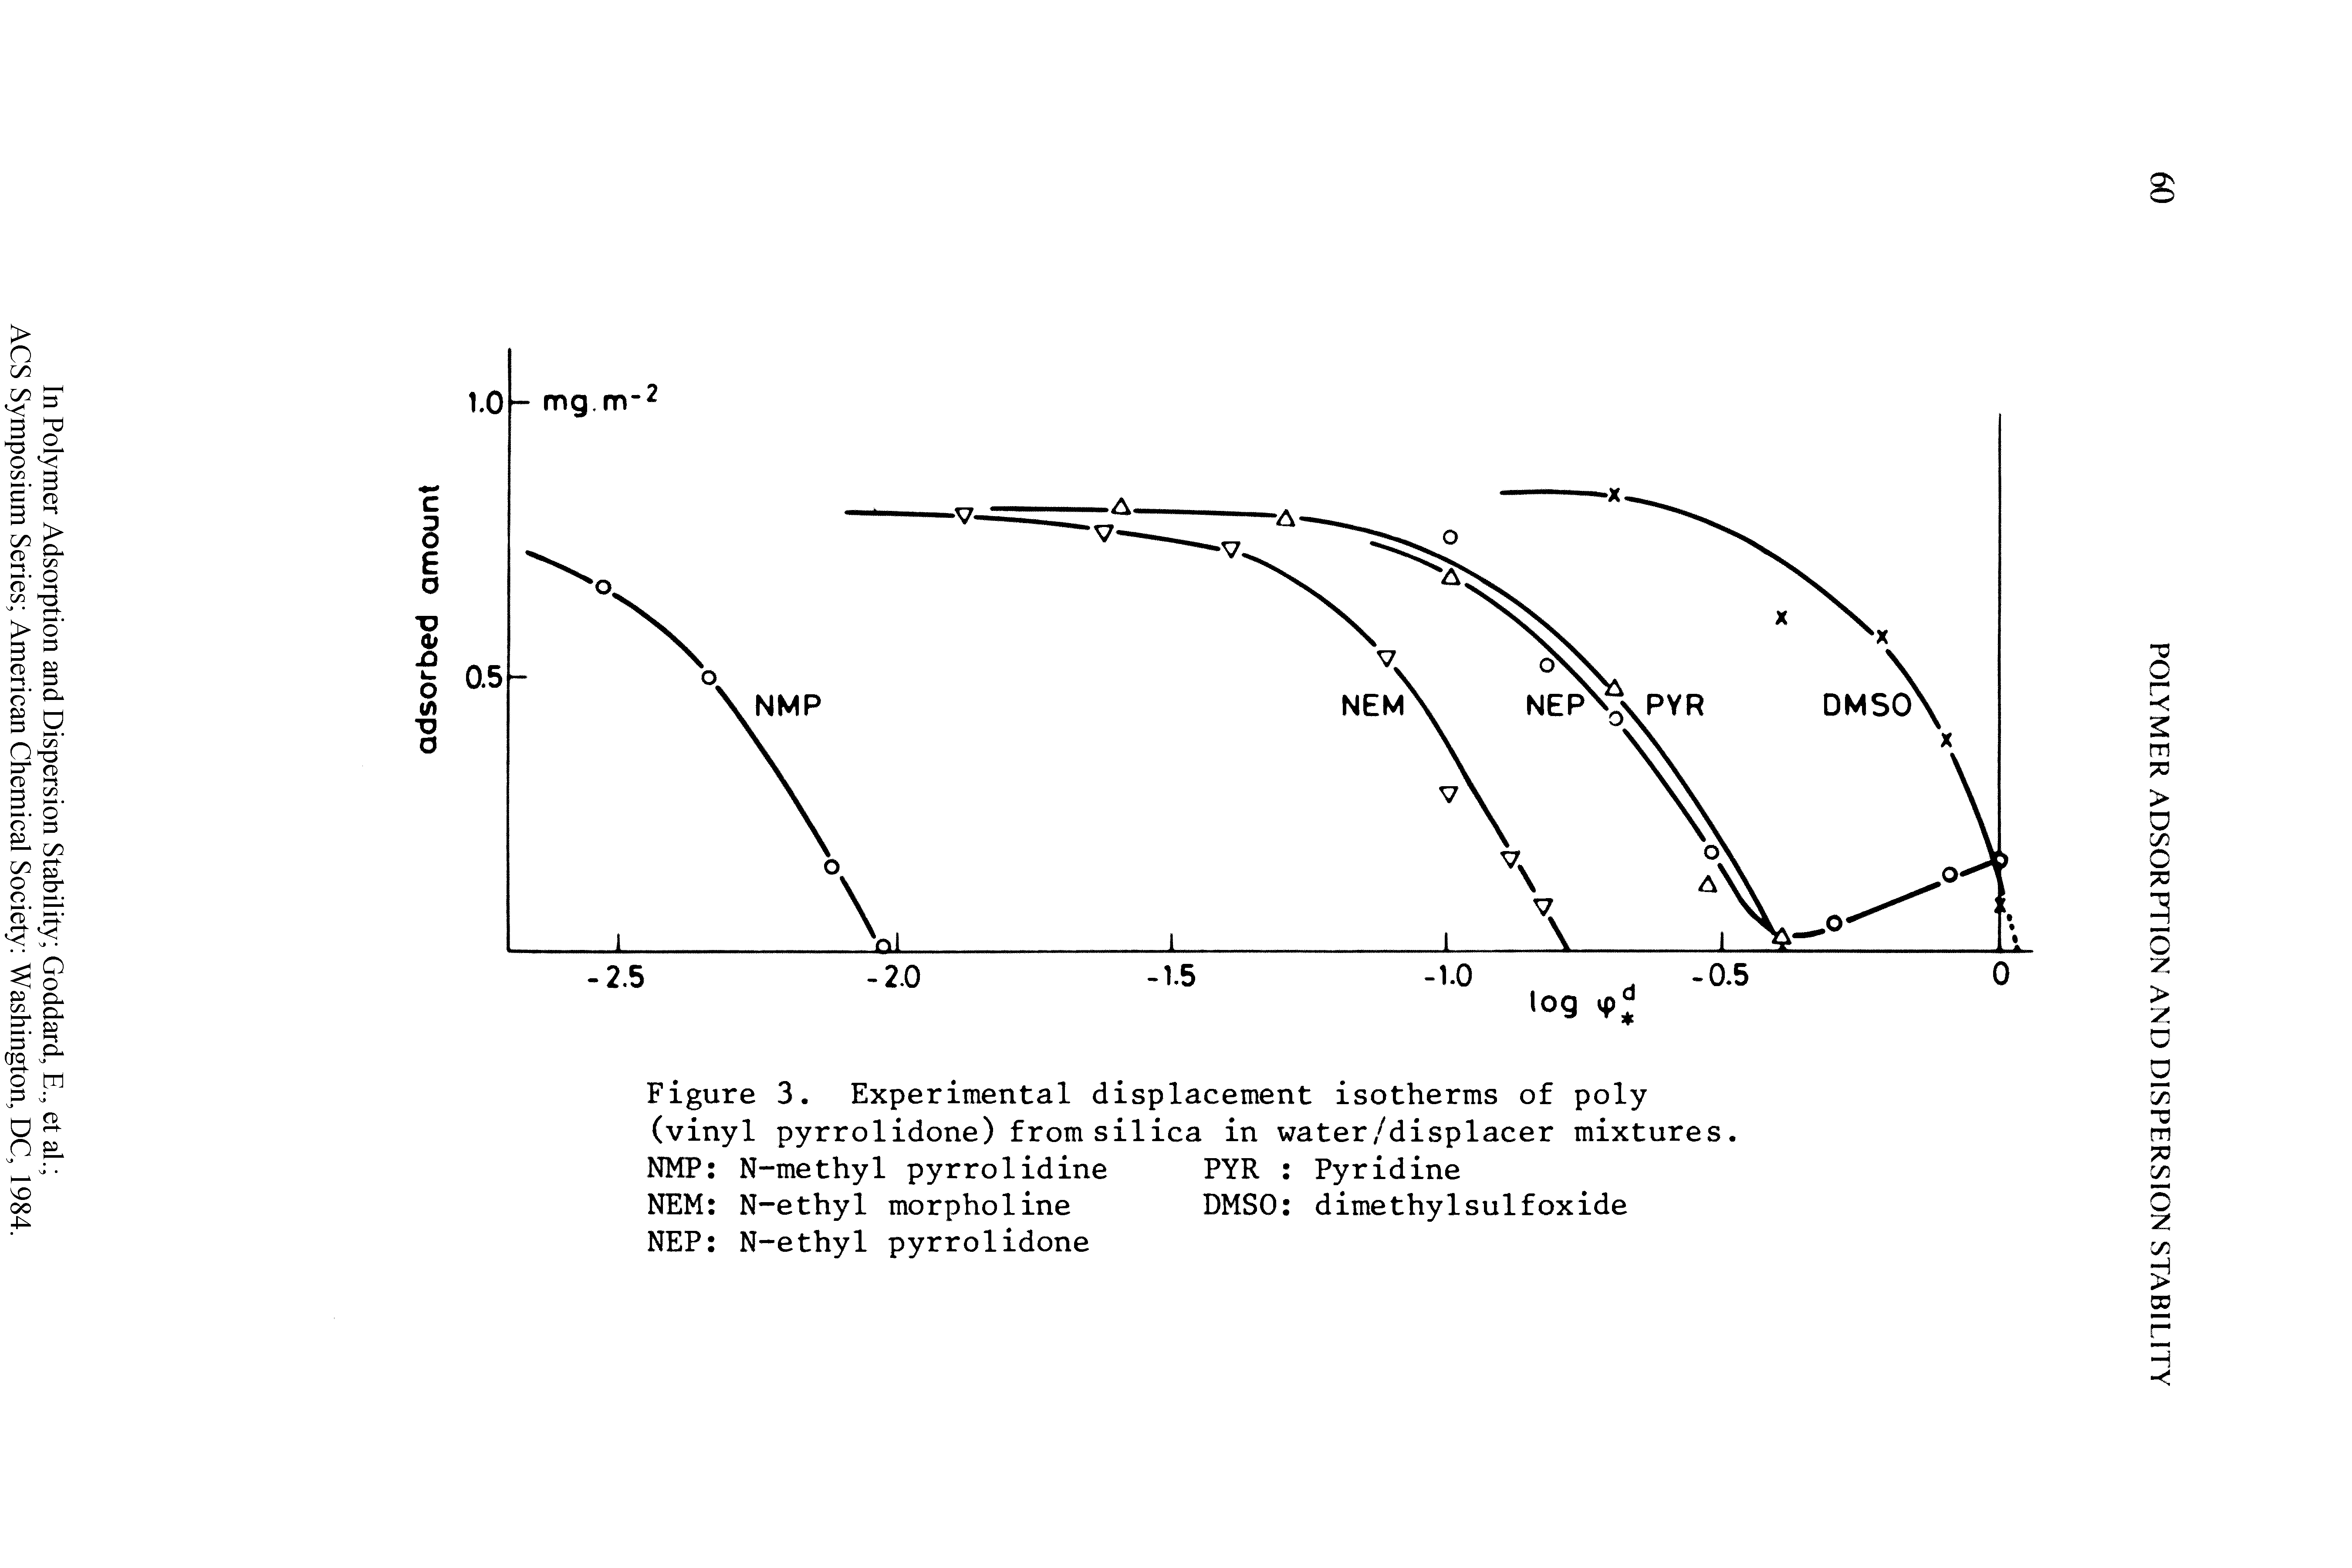 Figure 3. Experimental displacement isotherms of poly (vinyl pyrrolidone) from silica in water/displacer mixtures. NMP N-methyl pyrrolidine PYR Pyridine NEM N-ethyl morpholine DMSO dimethylsulfoxide...